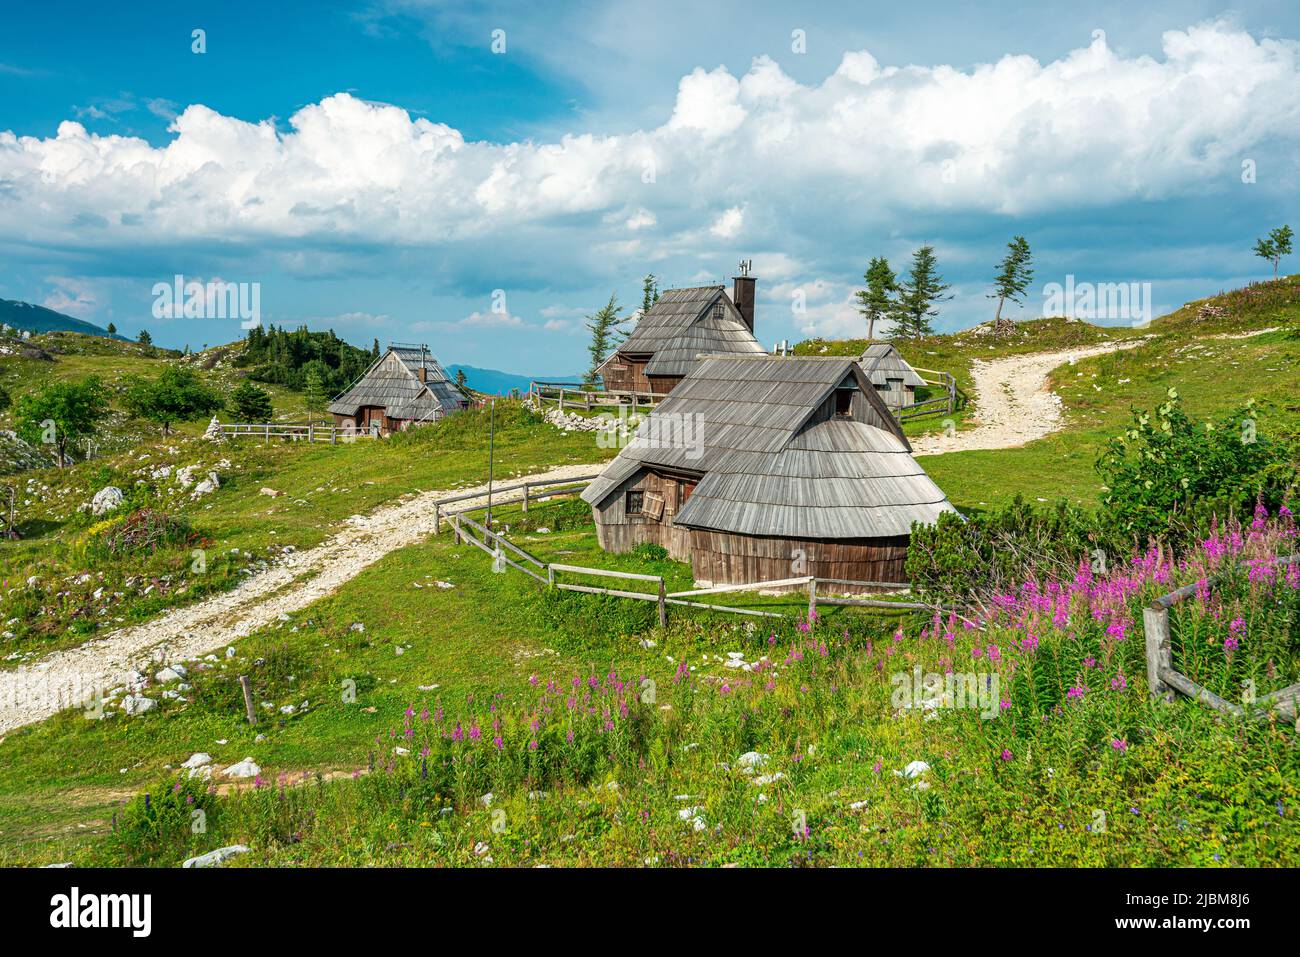 The panoramic And sunset view of sight seeing in Velika Planina, Slovenia country. Stock Photo